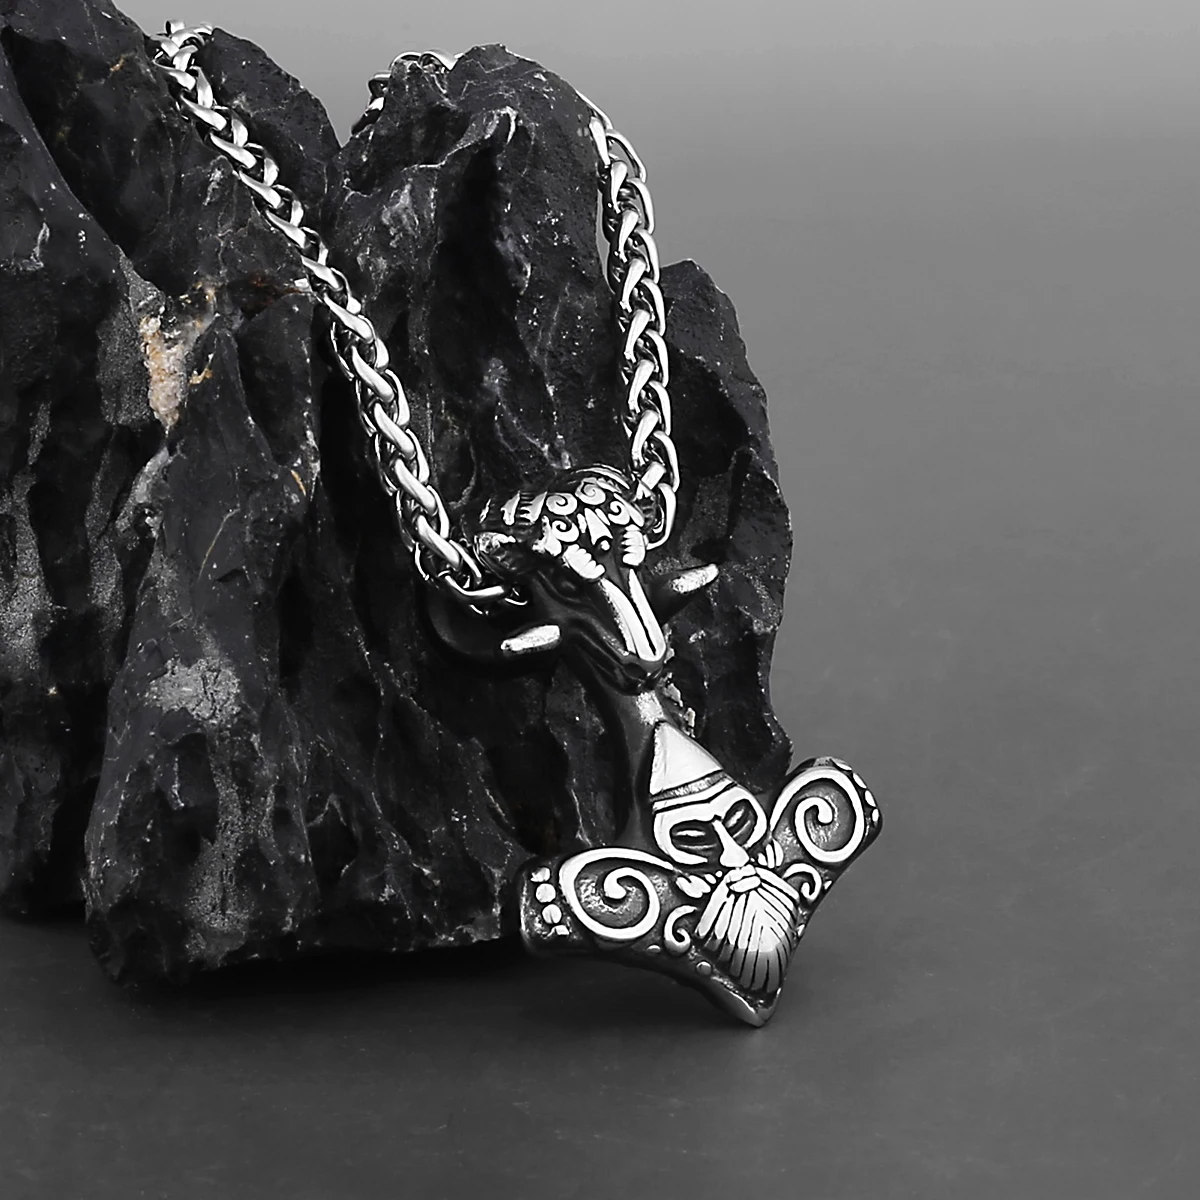 Viking Odin Rune Goat Head Pendant Necklace Men's Stainless Steel Thor's Hammer Necklace Jewelry Domineering Party Club Gift